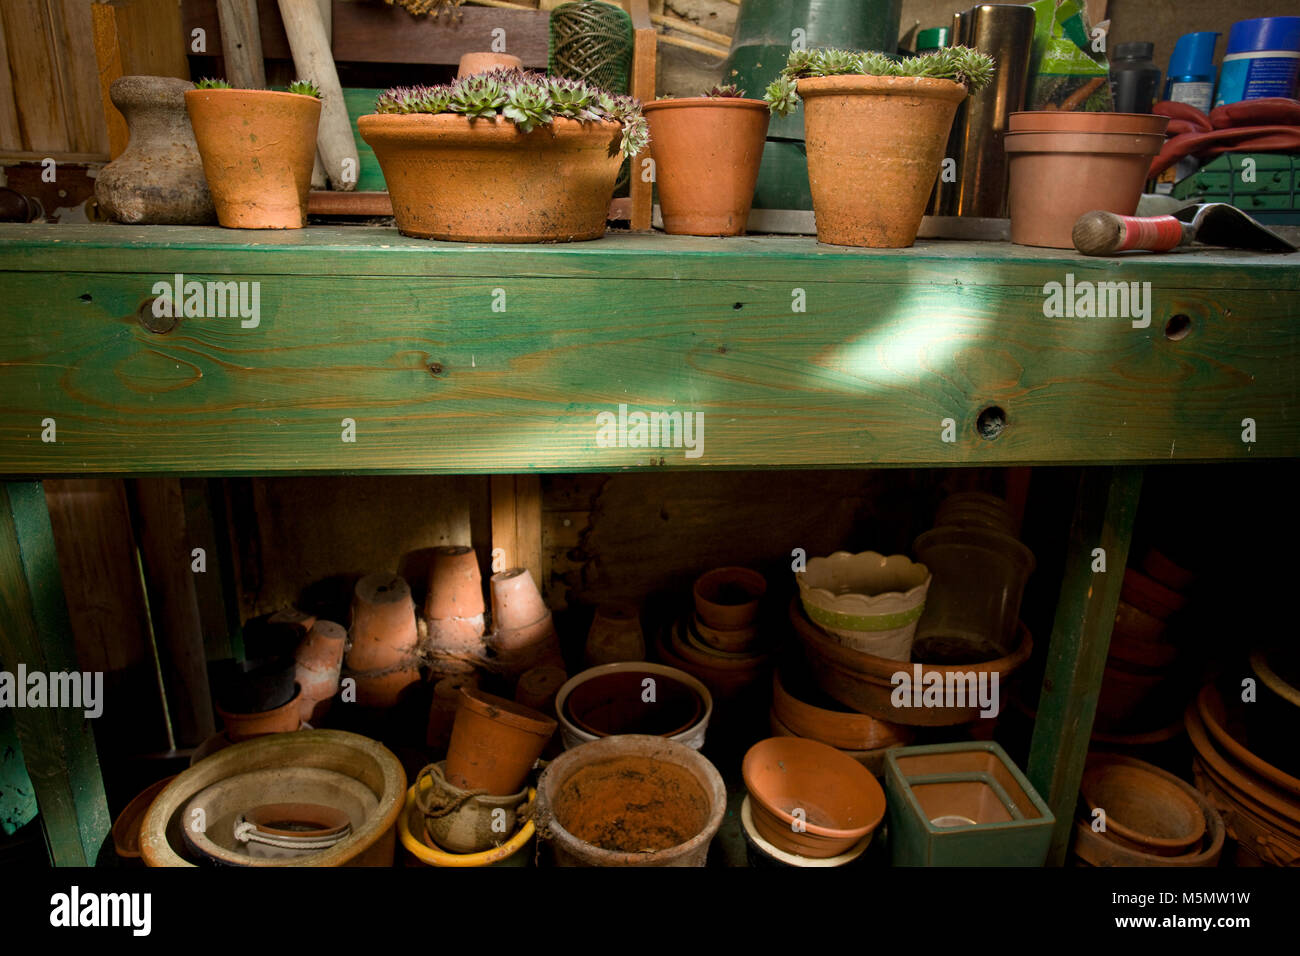 Garden shed interior with succulents on table Stock Photo